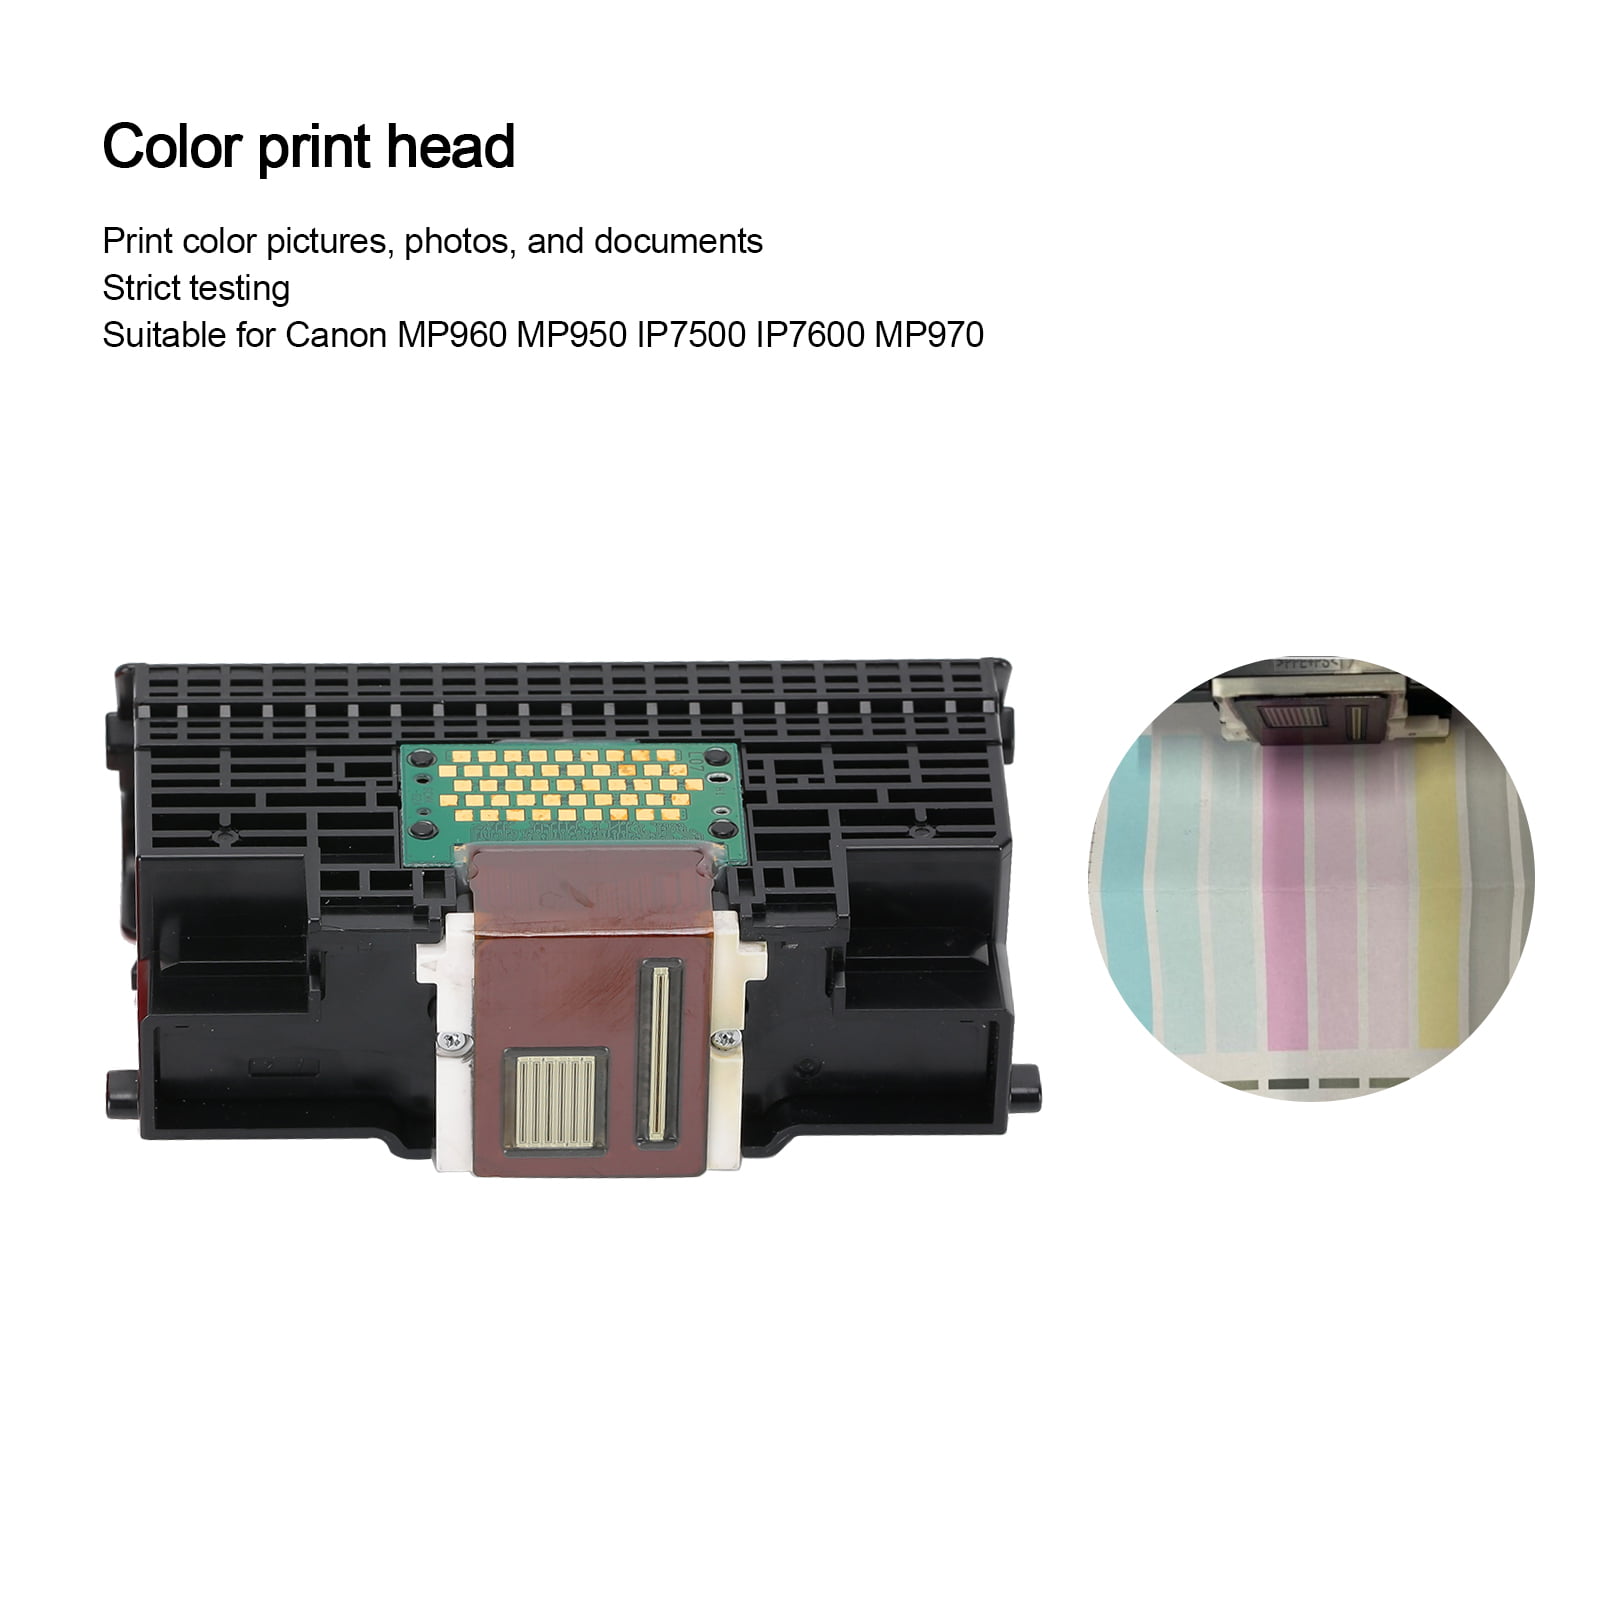 ORIGINAL & New QY6-0062 PrintHead For Canon MP950 MP960 IP7500 IP7600 